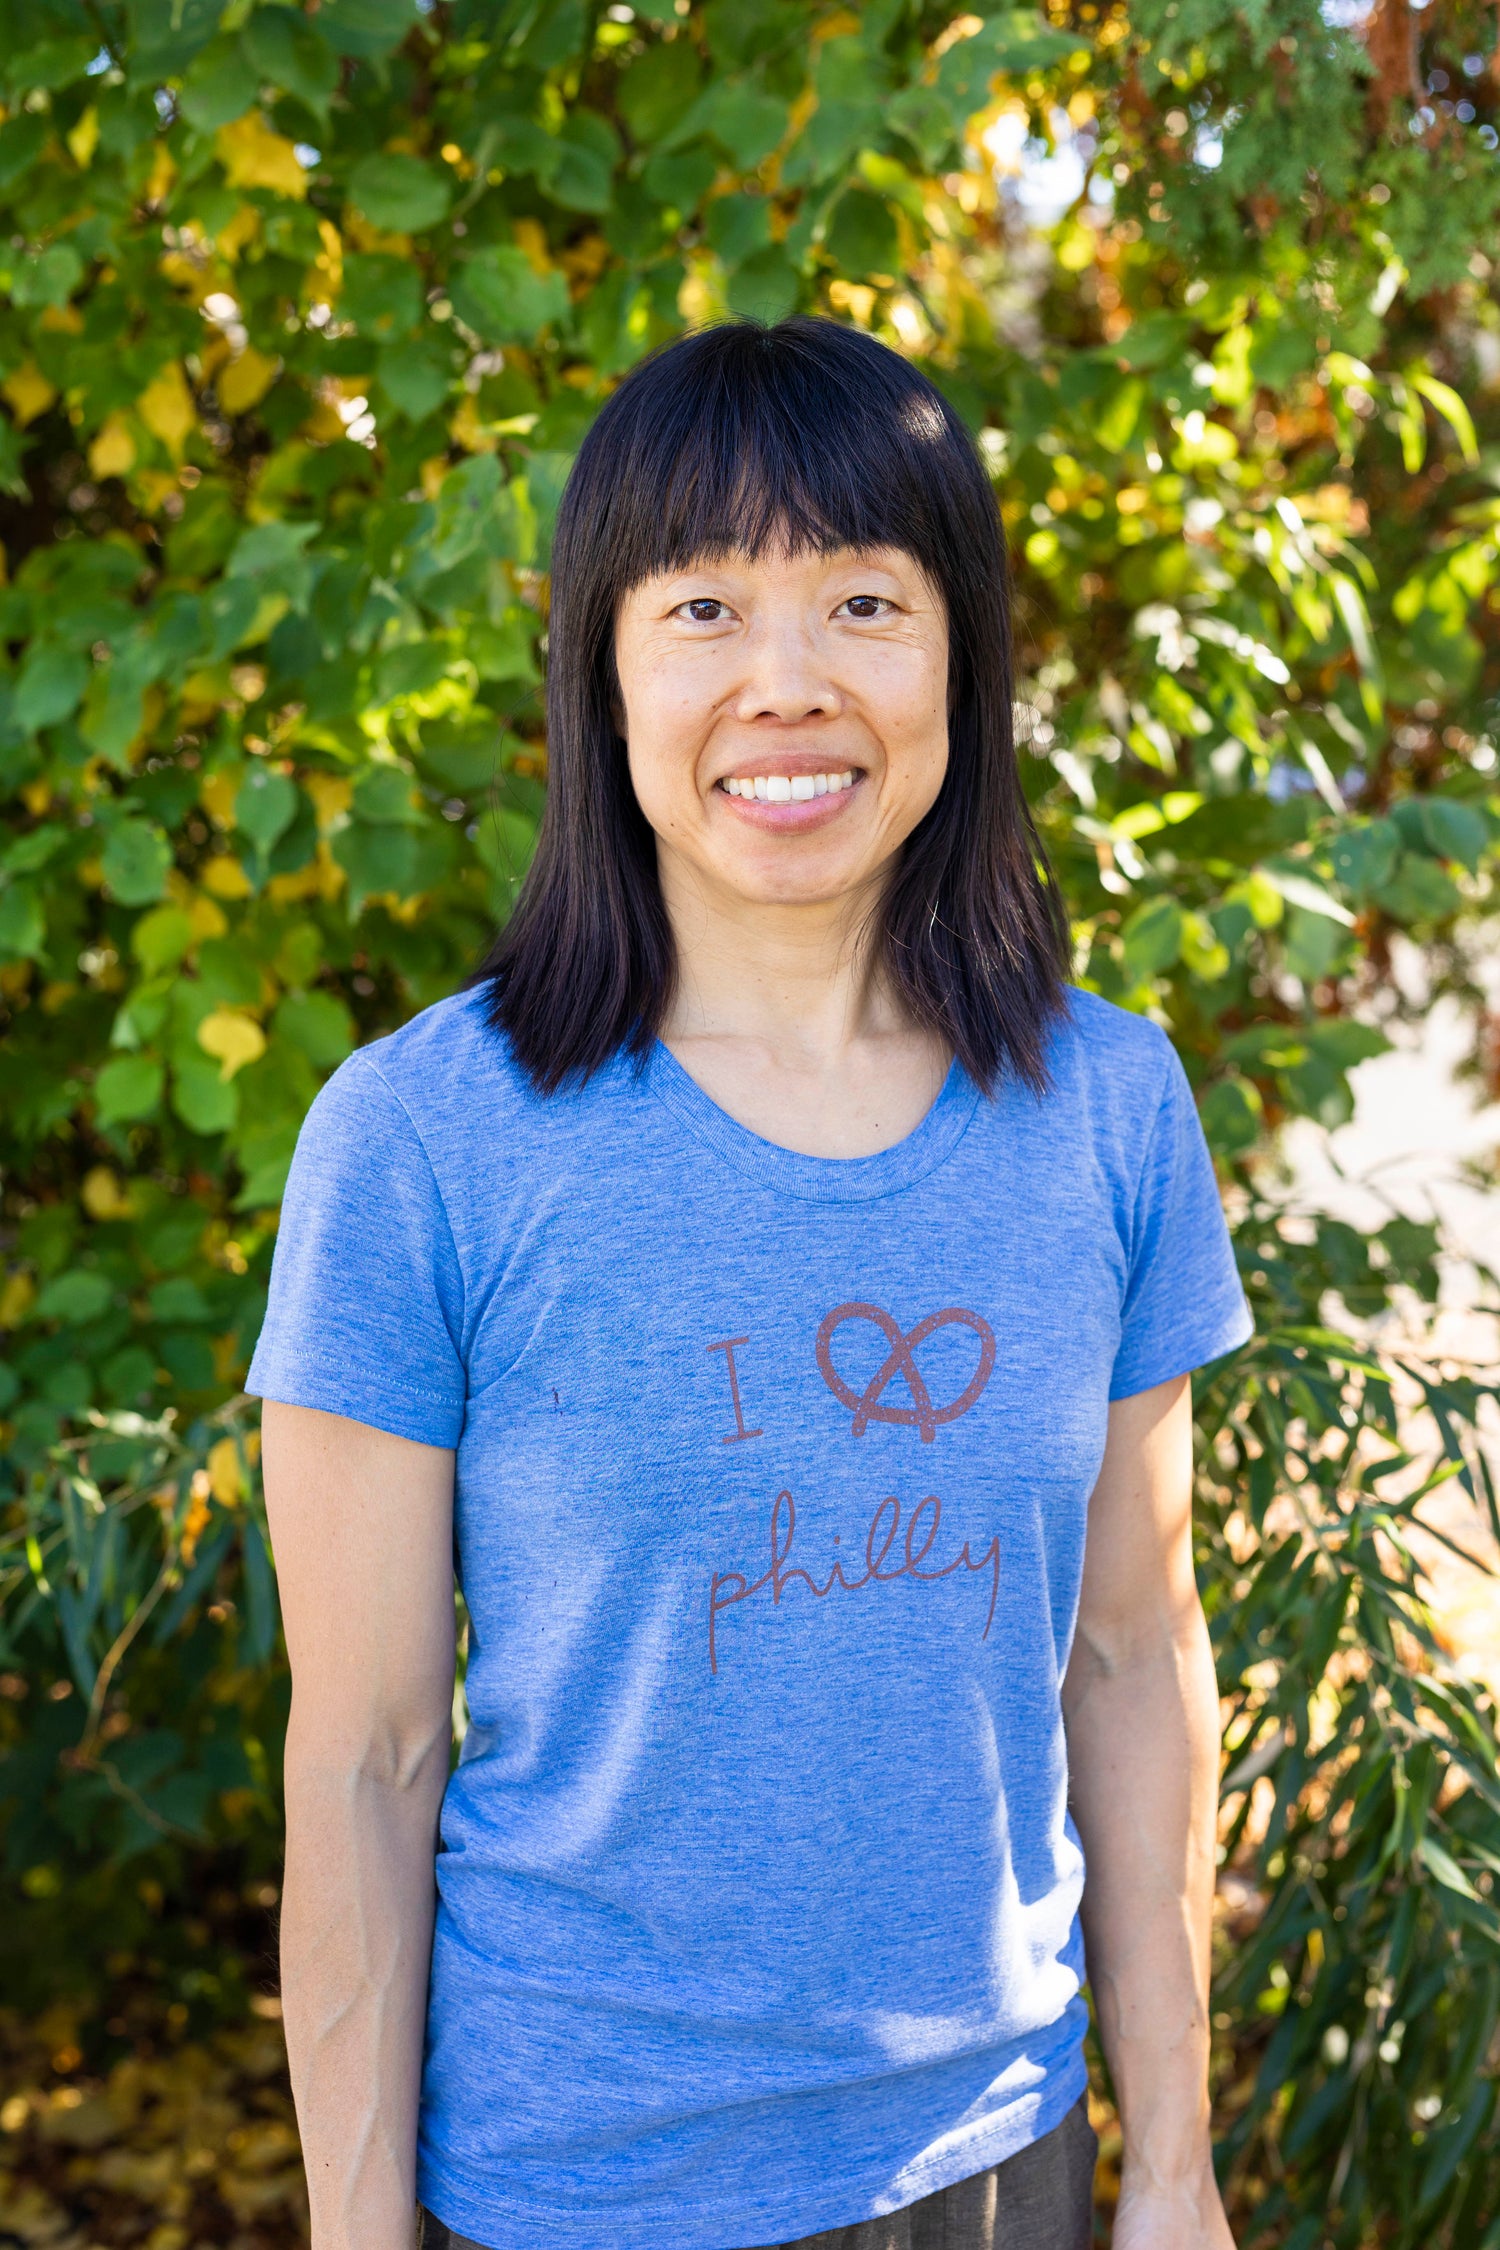 Photo of smiling woman with medium length dark hair in blue t-shirt with trees in background.